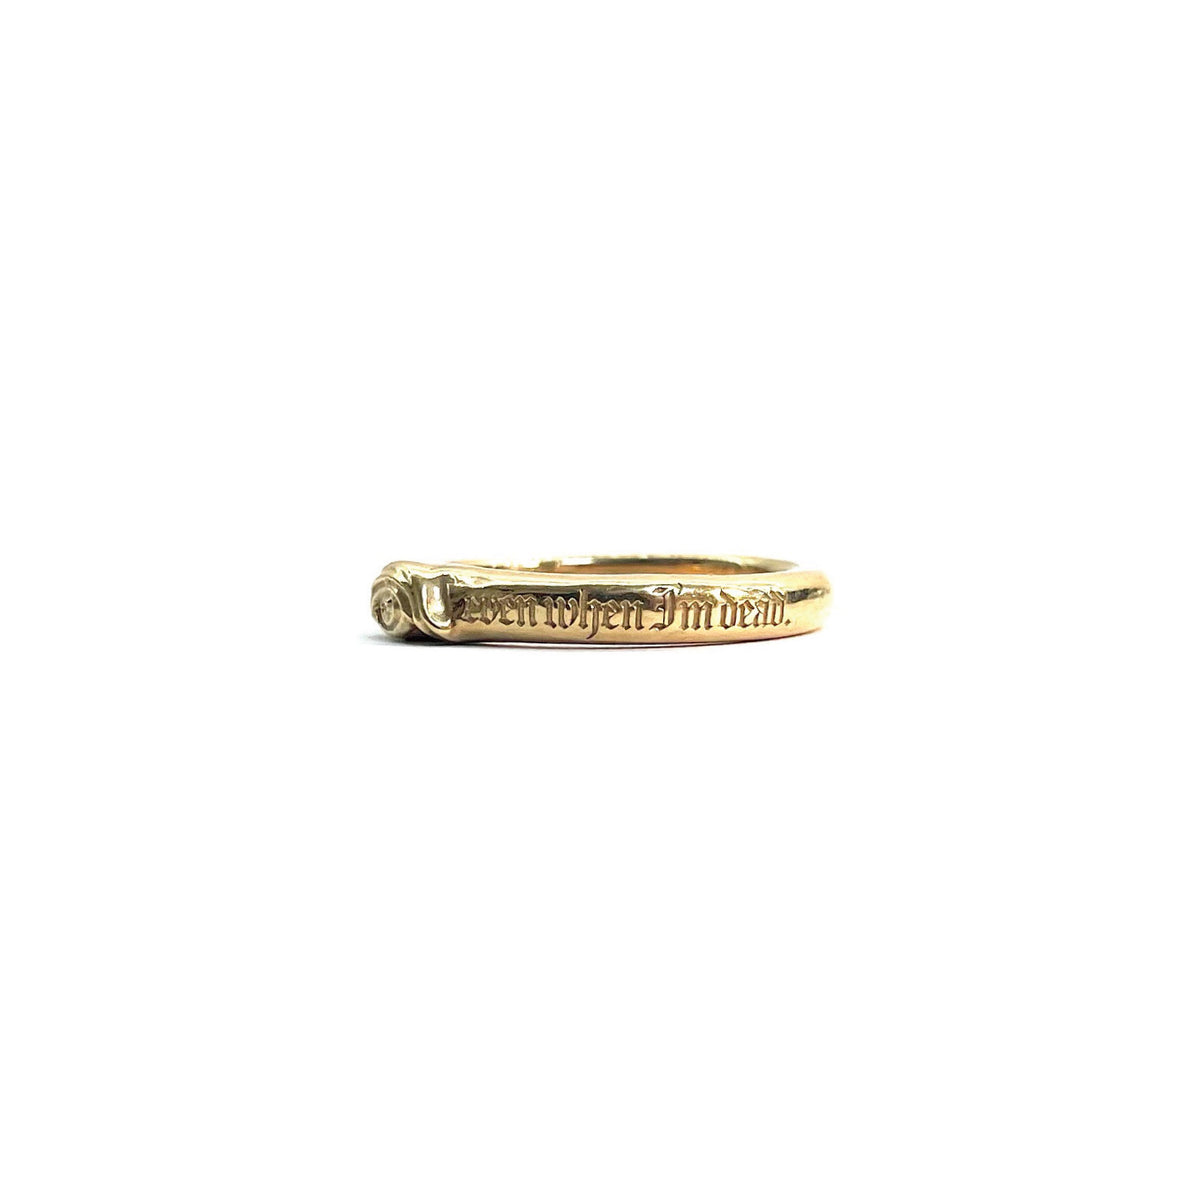 Eye pinky ring 18Gold plated | GALAXY BROAD SHOP